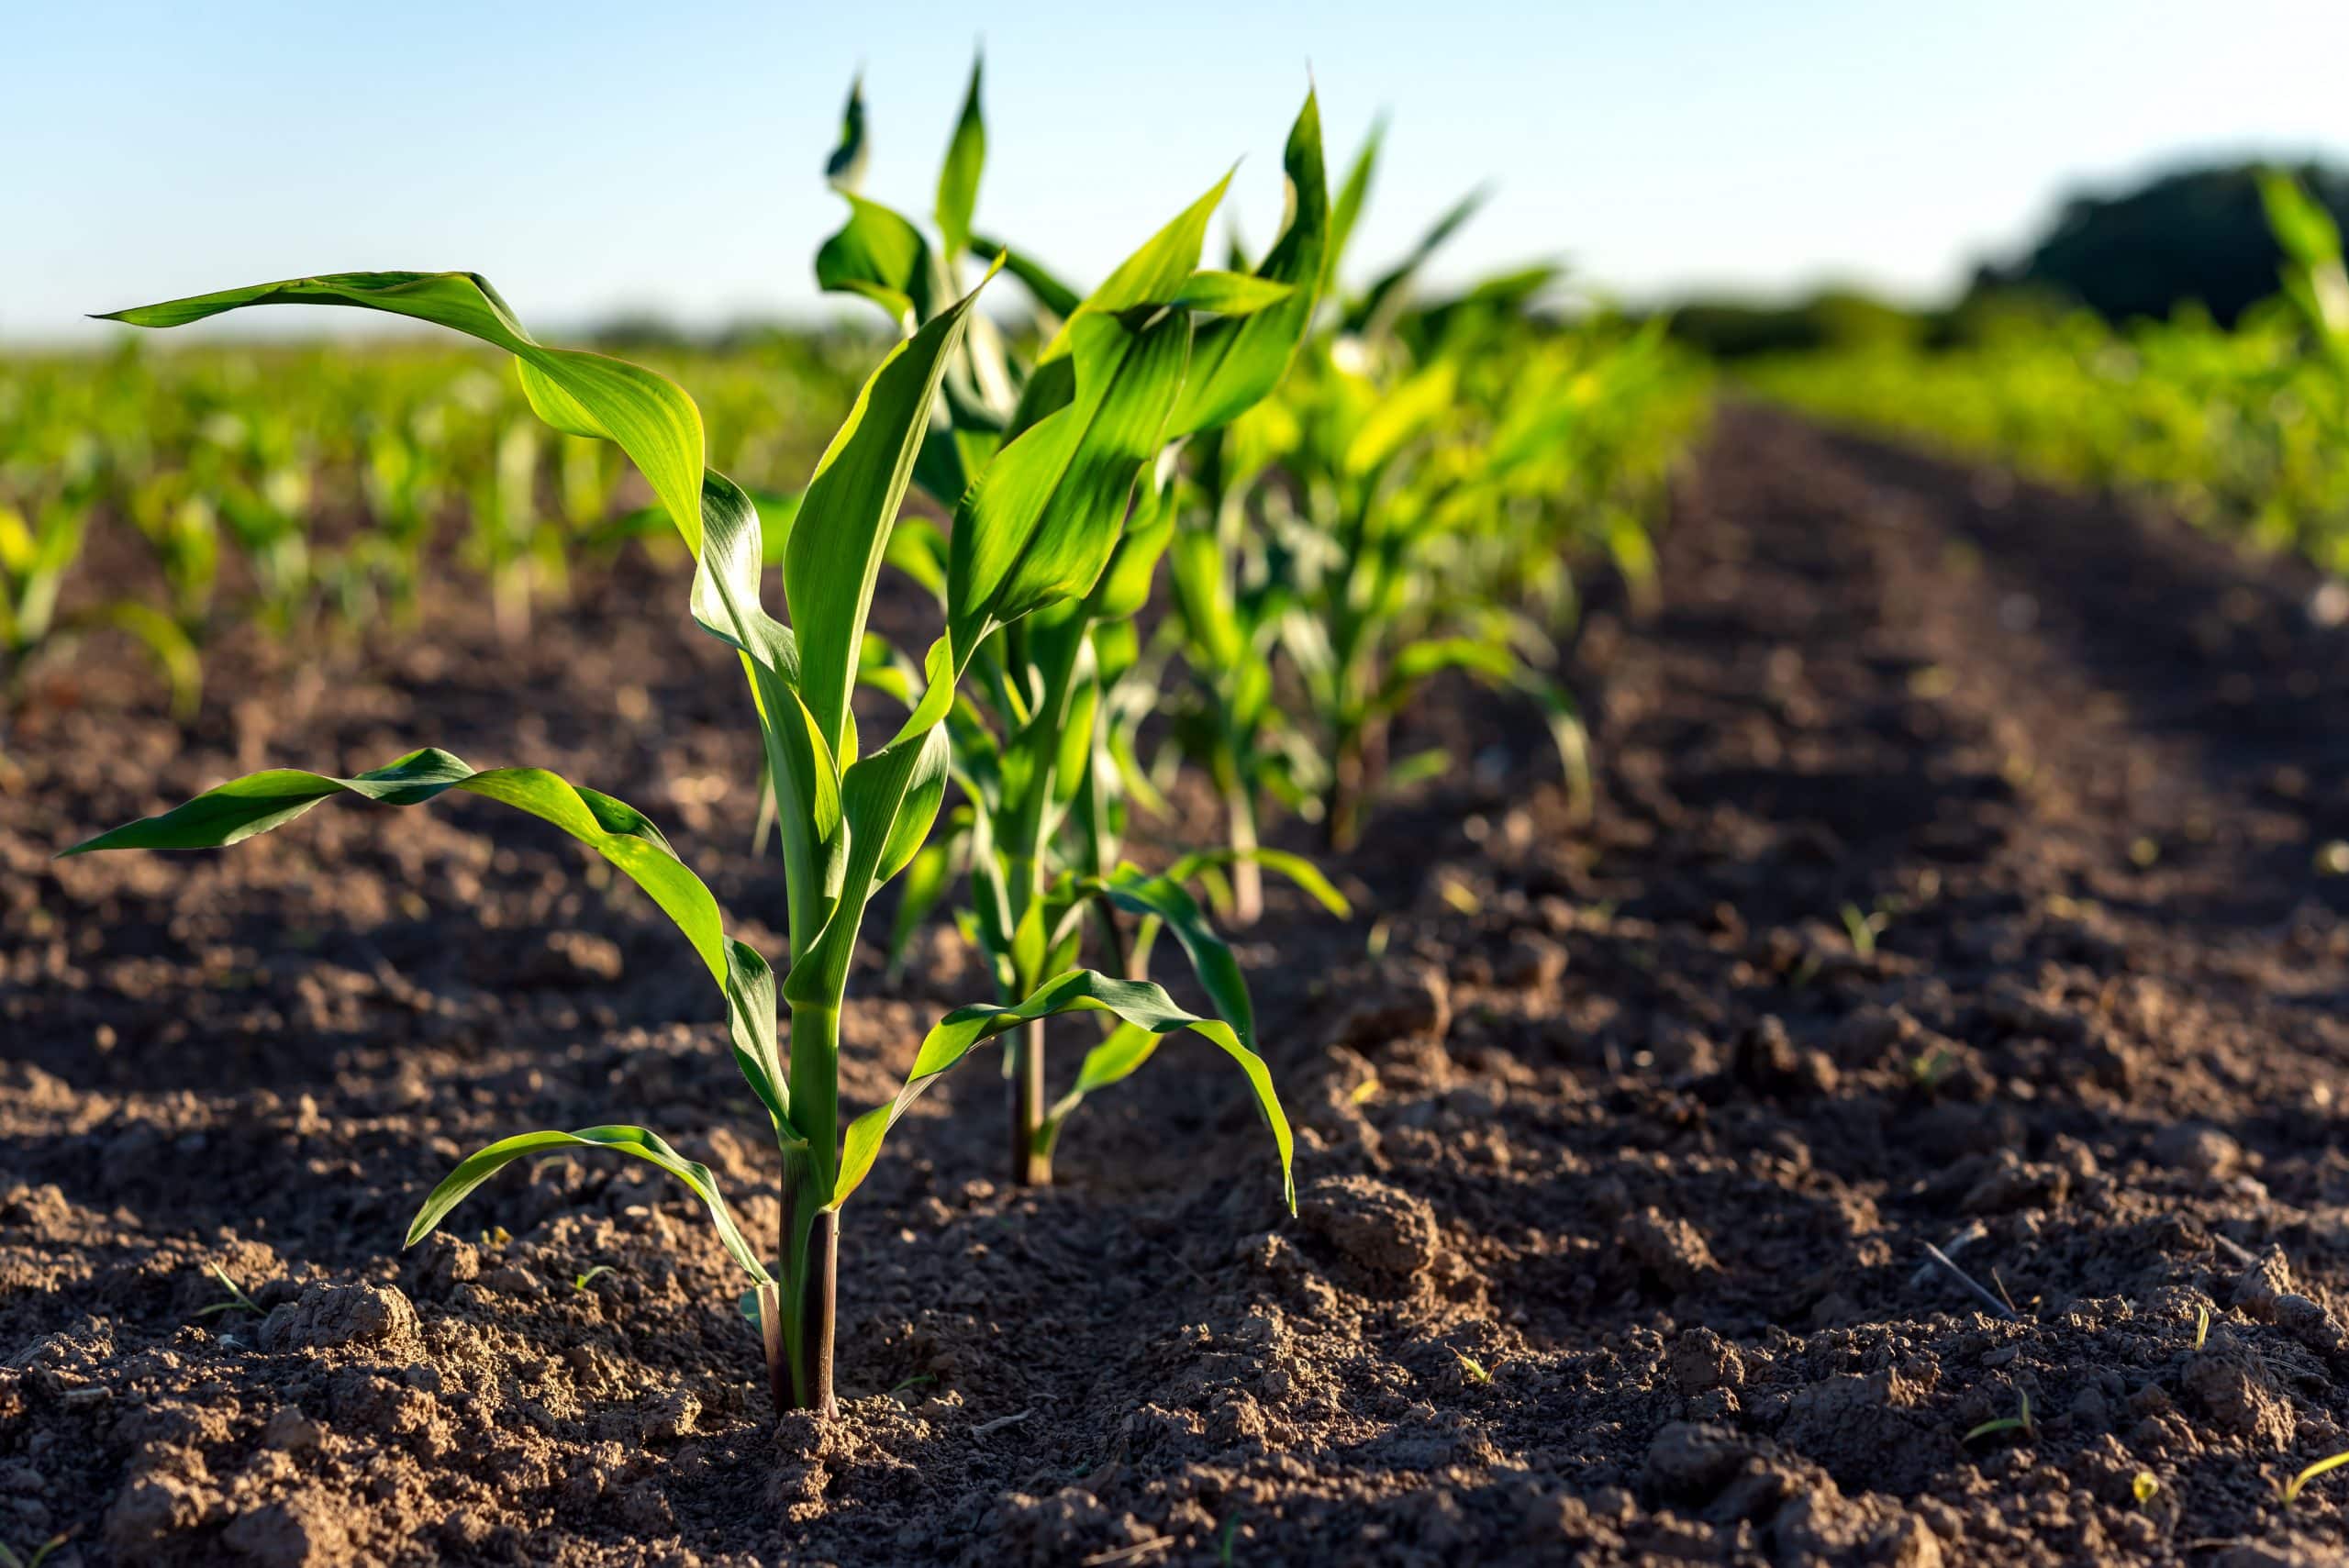 Physiostart improves maize establishment and nutrient absorption for optimal early development.